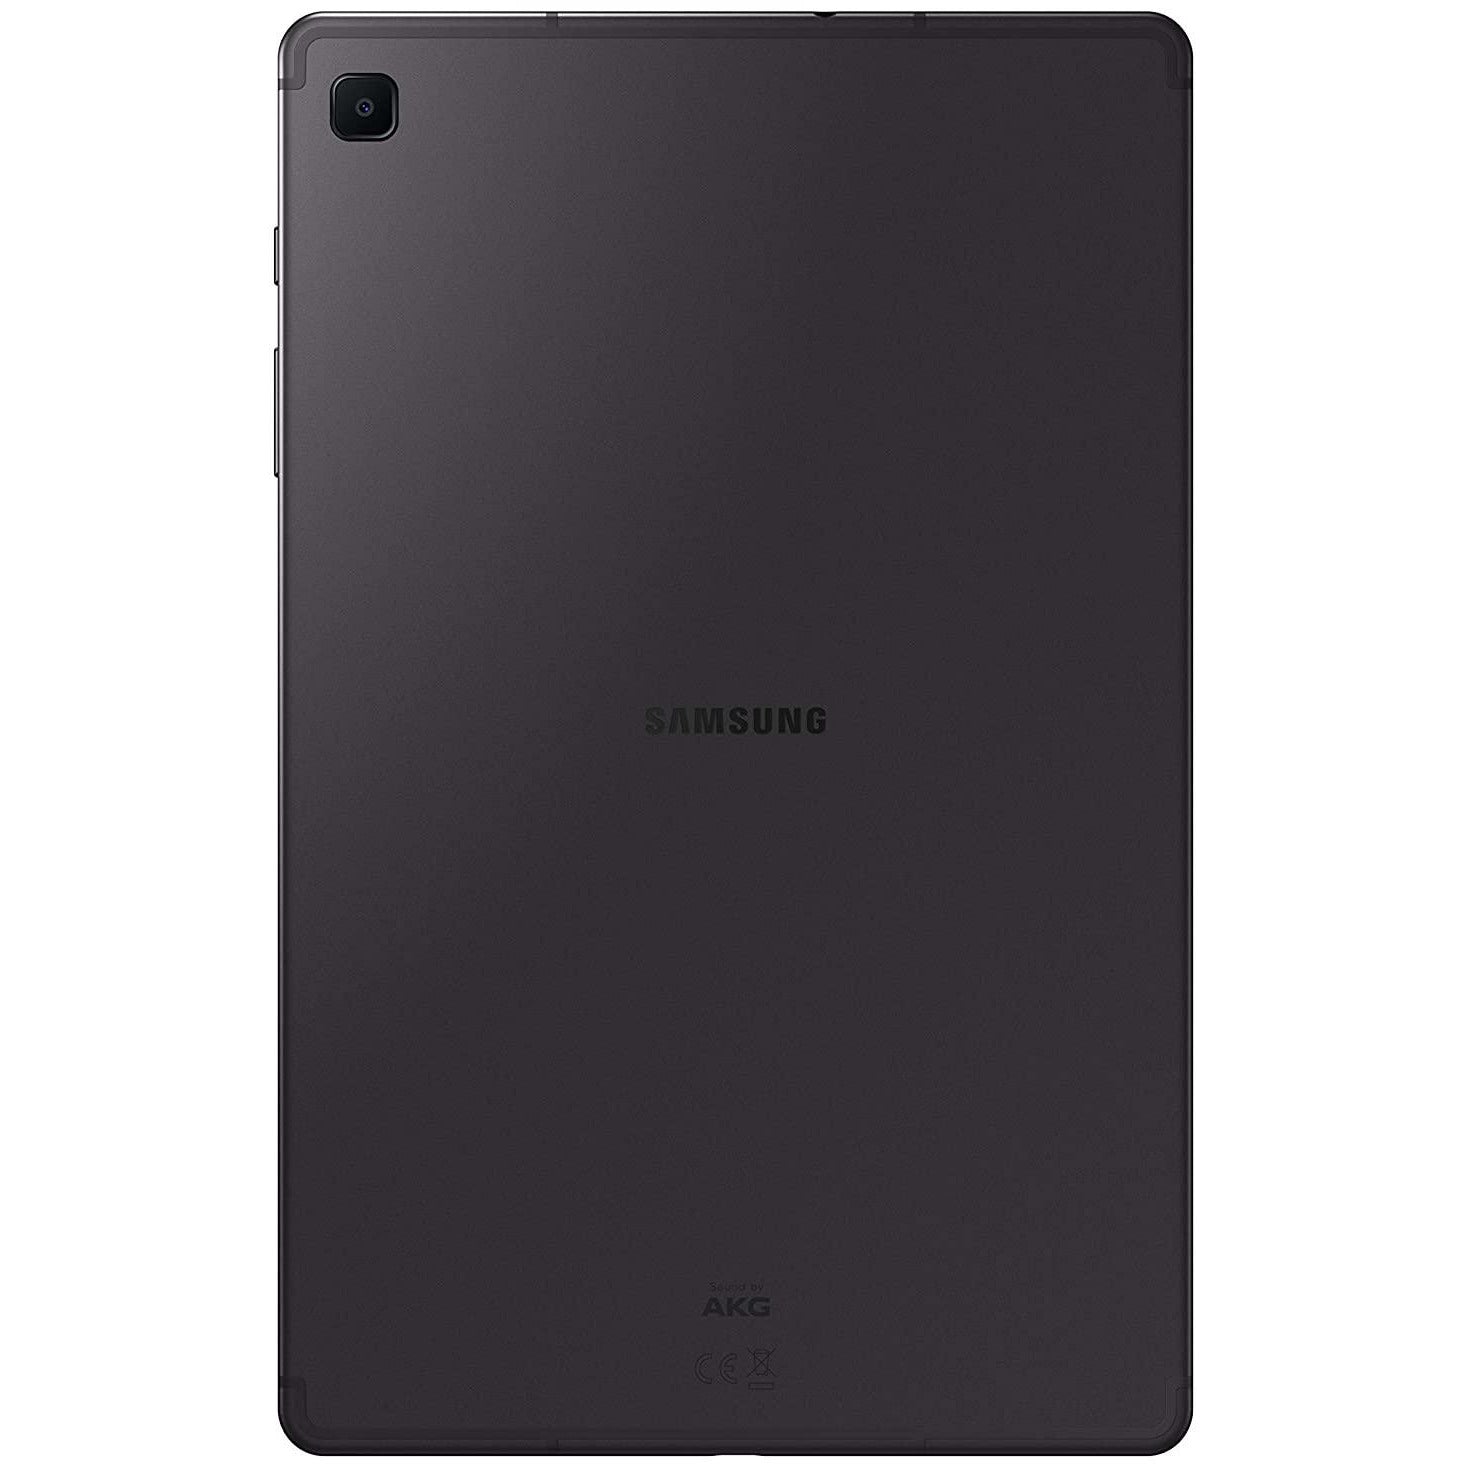 Samsung Galaxy Tab S6 Lite Tablet with S Pen, Android, 64GB, 4GB RAM,  Wi-Fi, 10.4, Angora Blue